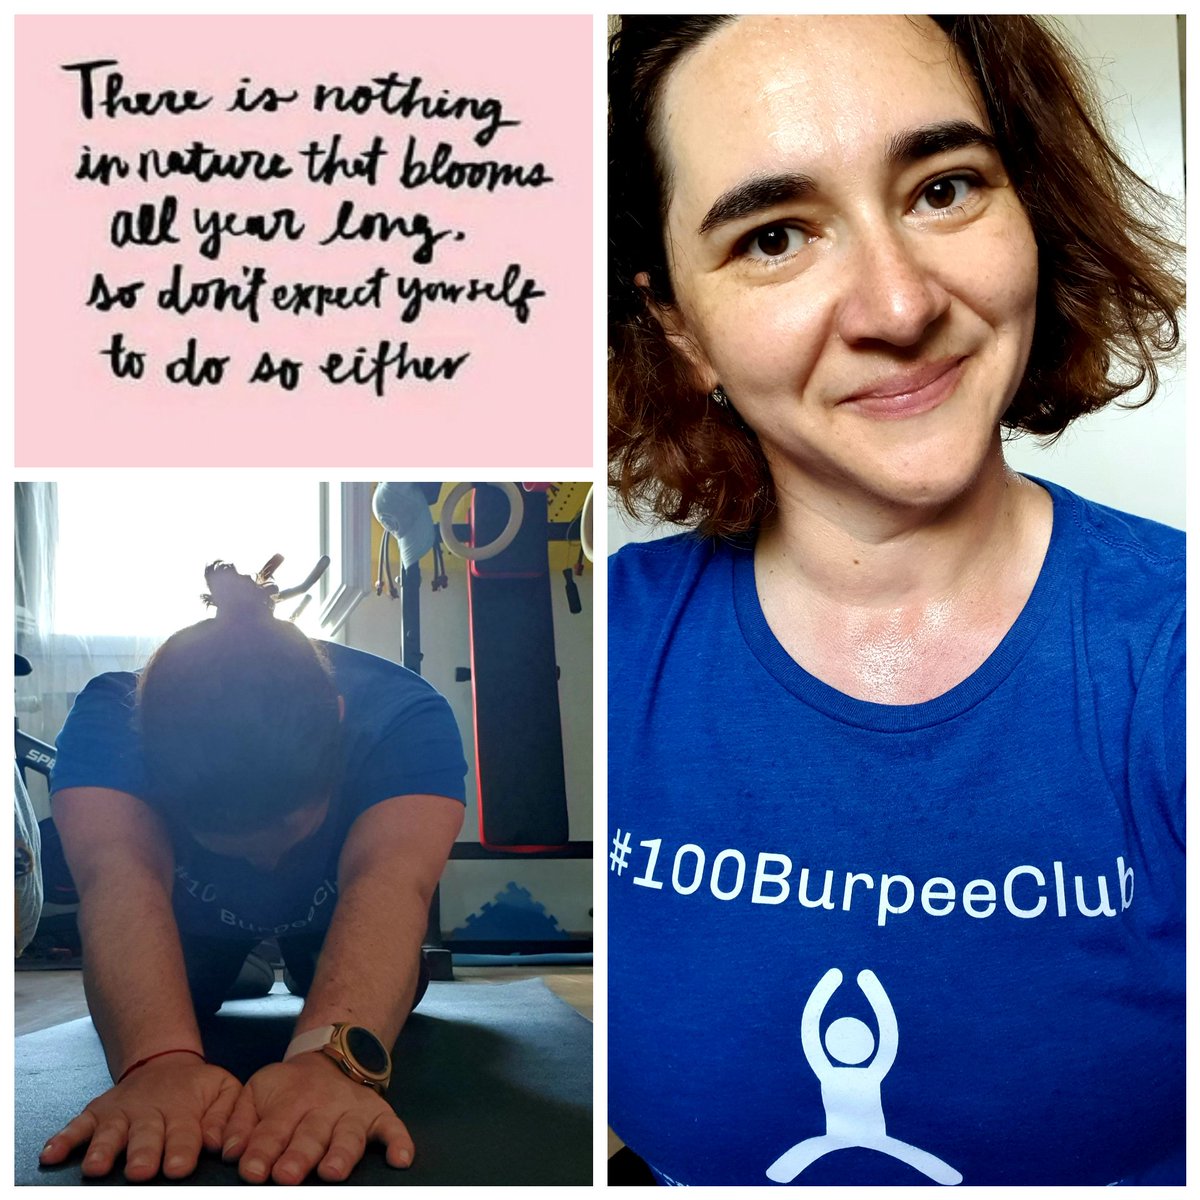 When you feel down, less motivated😔 because this time are rough, think about what you got through and you'll rise up again 👊💪. Let  the past be the past and keep on moving forward  #mypeakchallenge #unitedfrenchyspeakers #youarenotalone #burpeeclub #peakerforlife